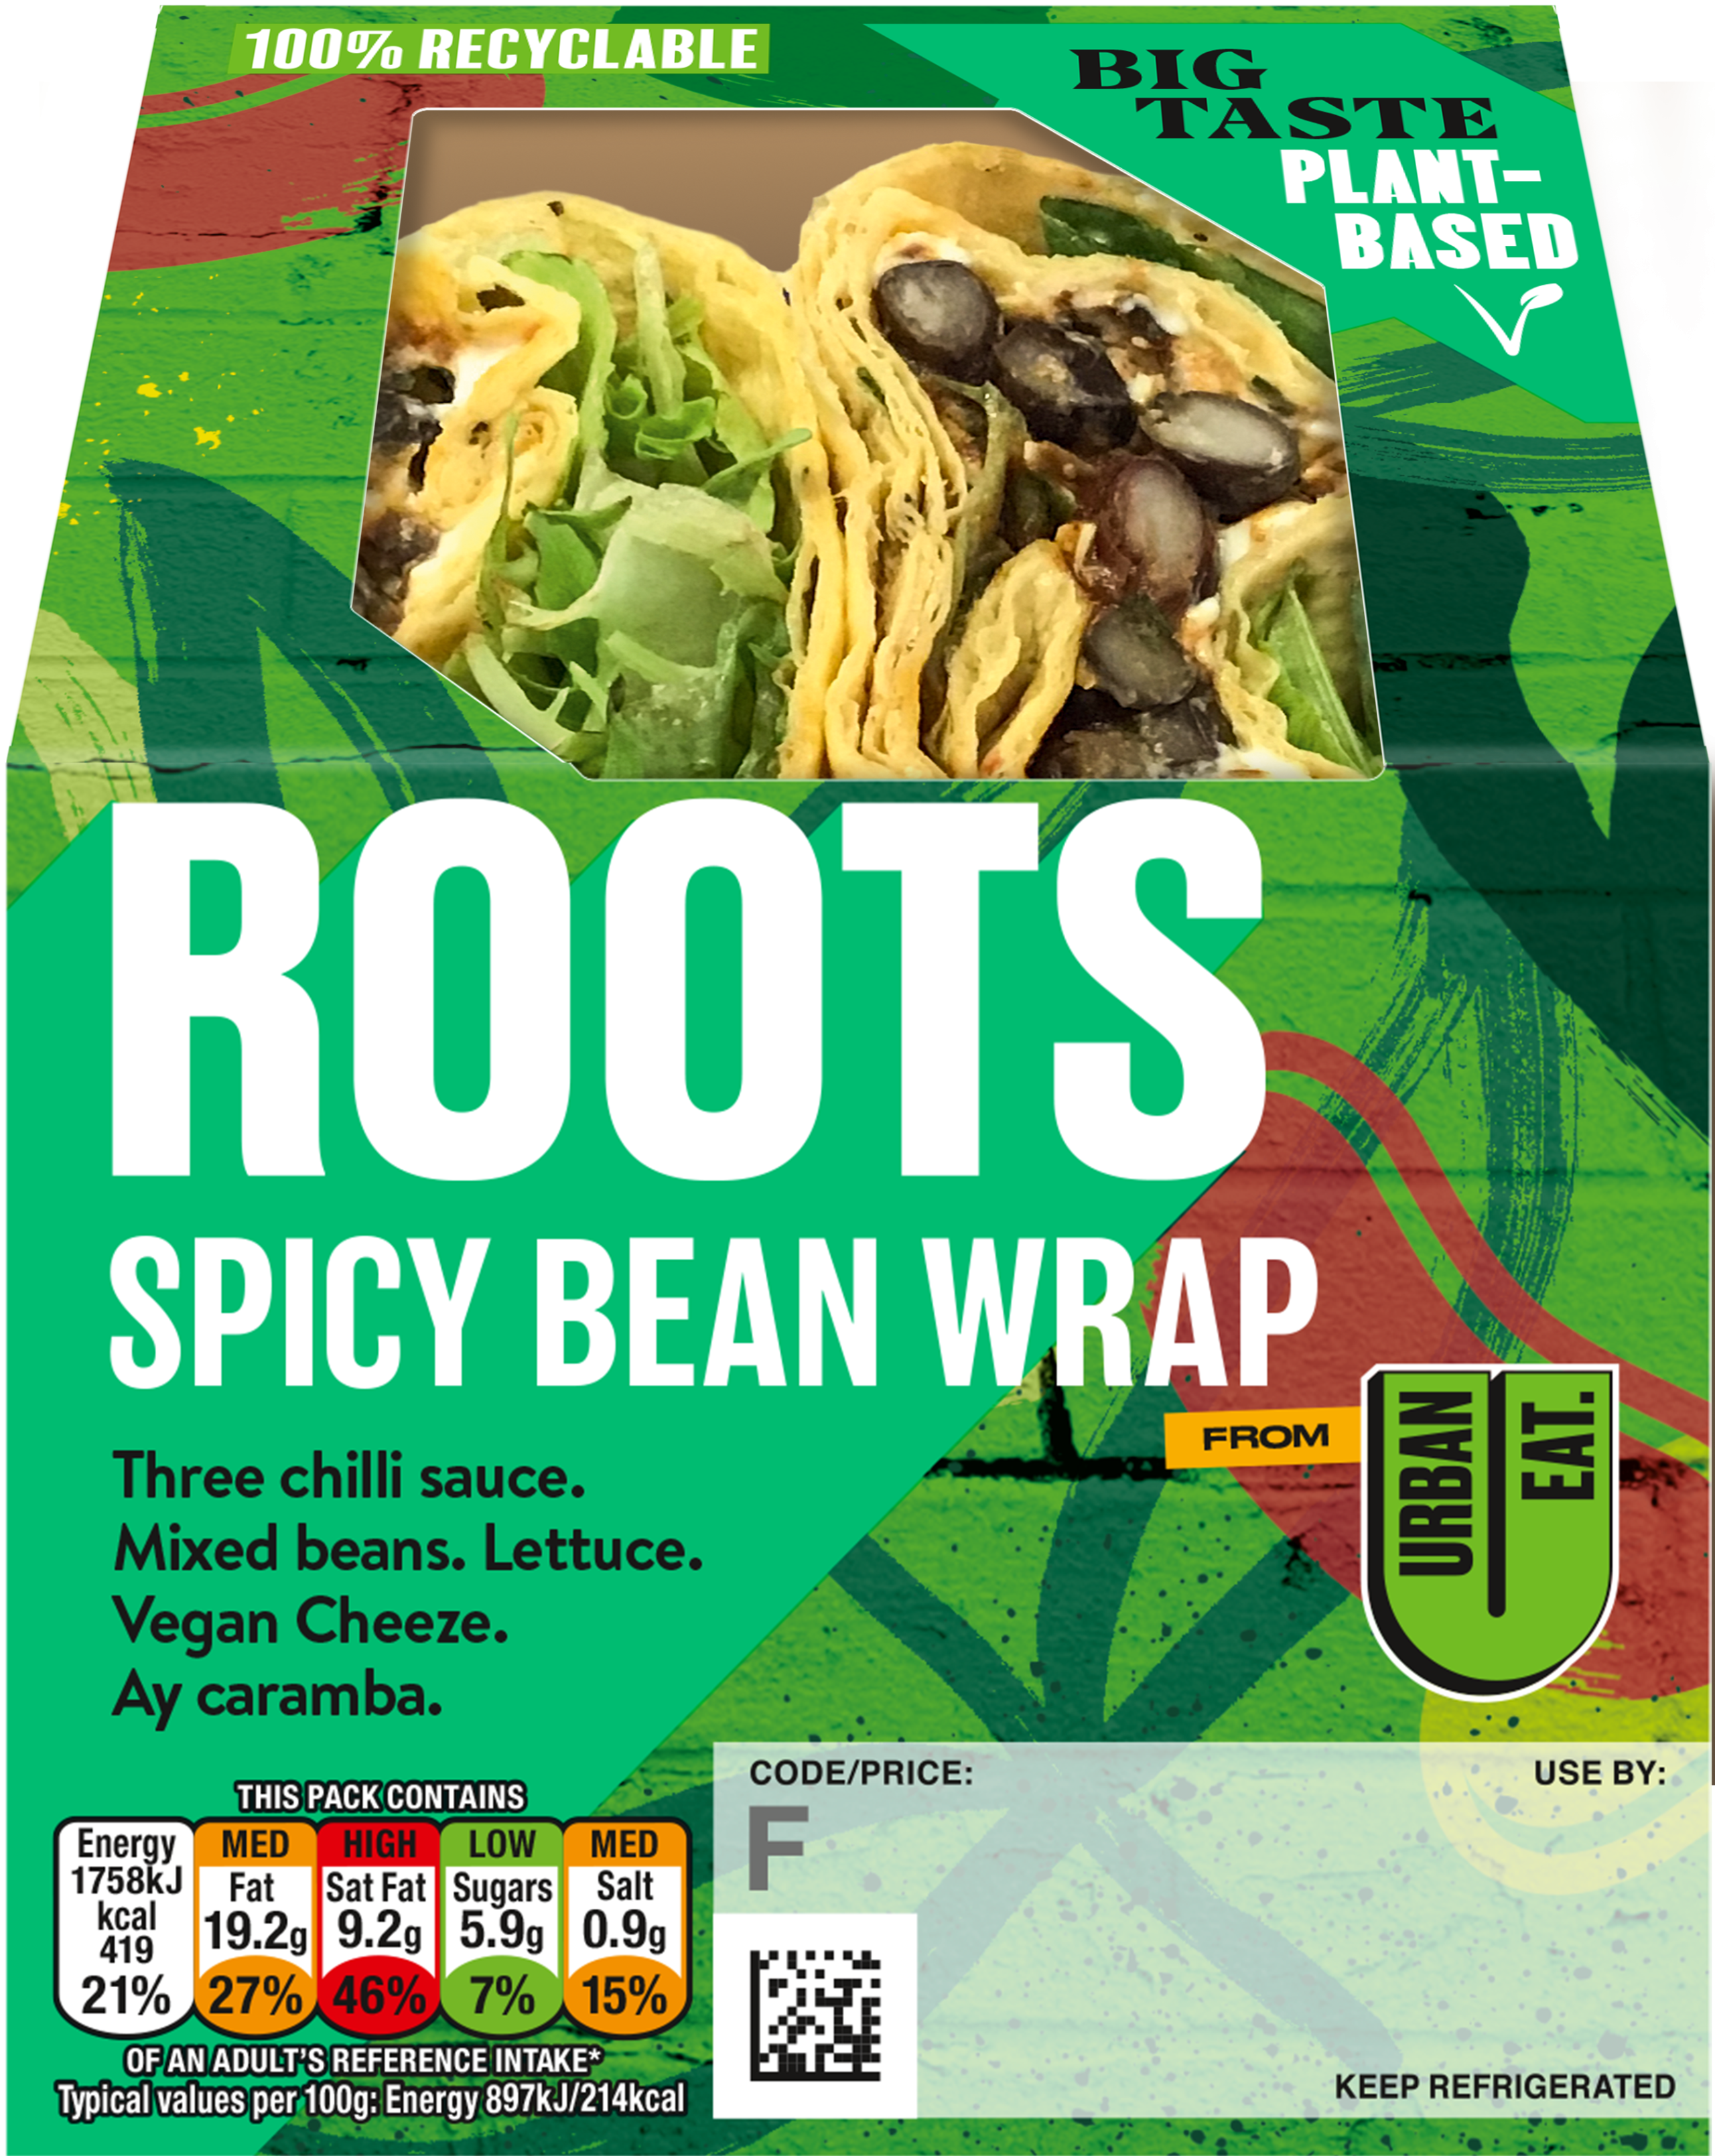 Back to their roots: Urban Eat. relaunches plant-based range